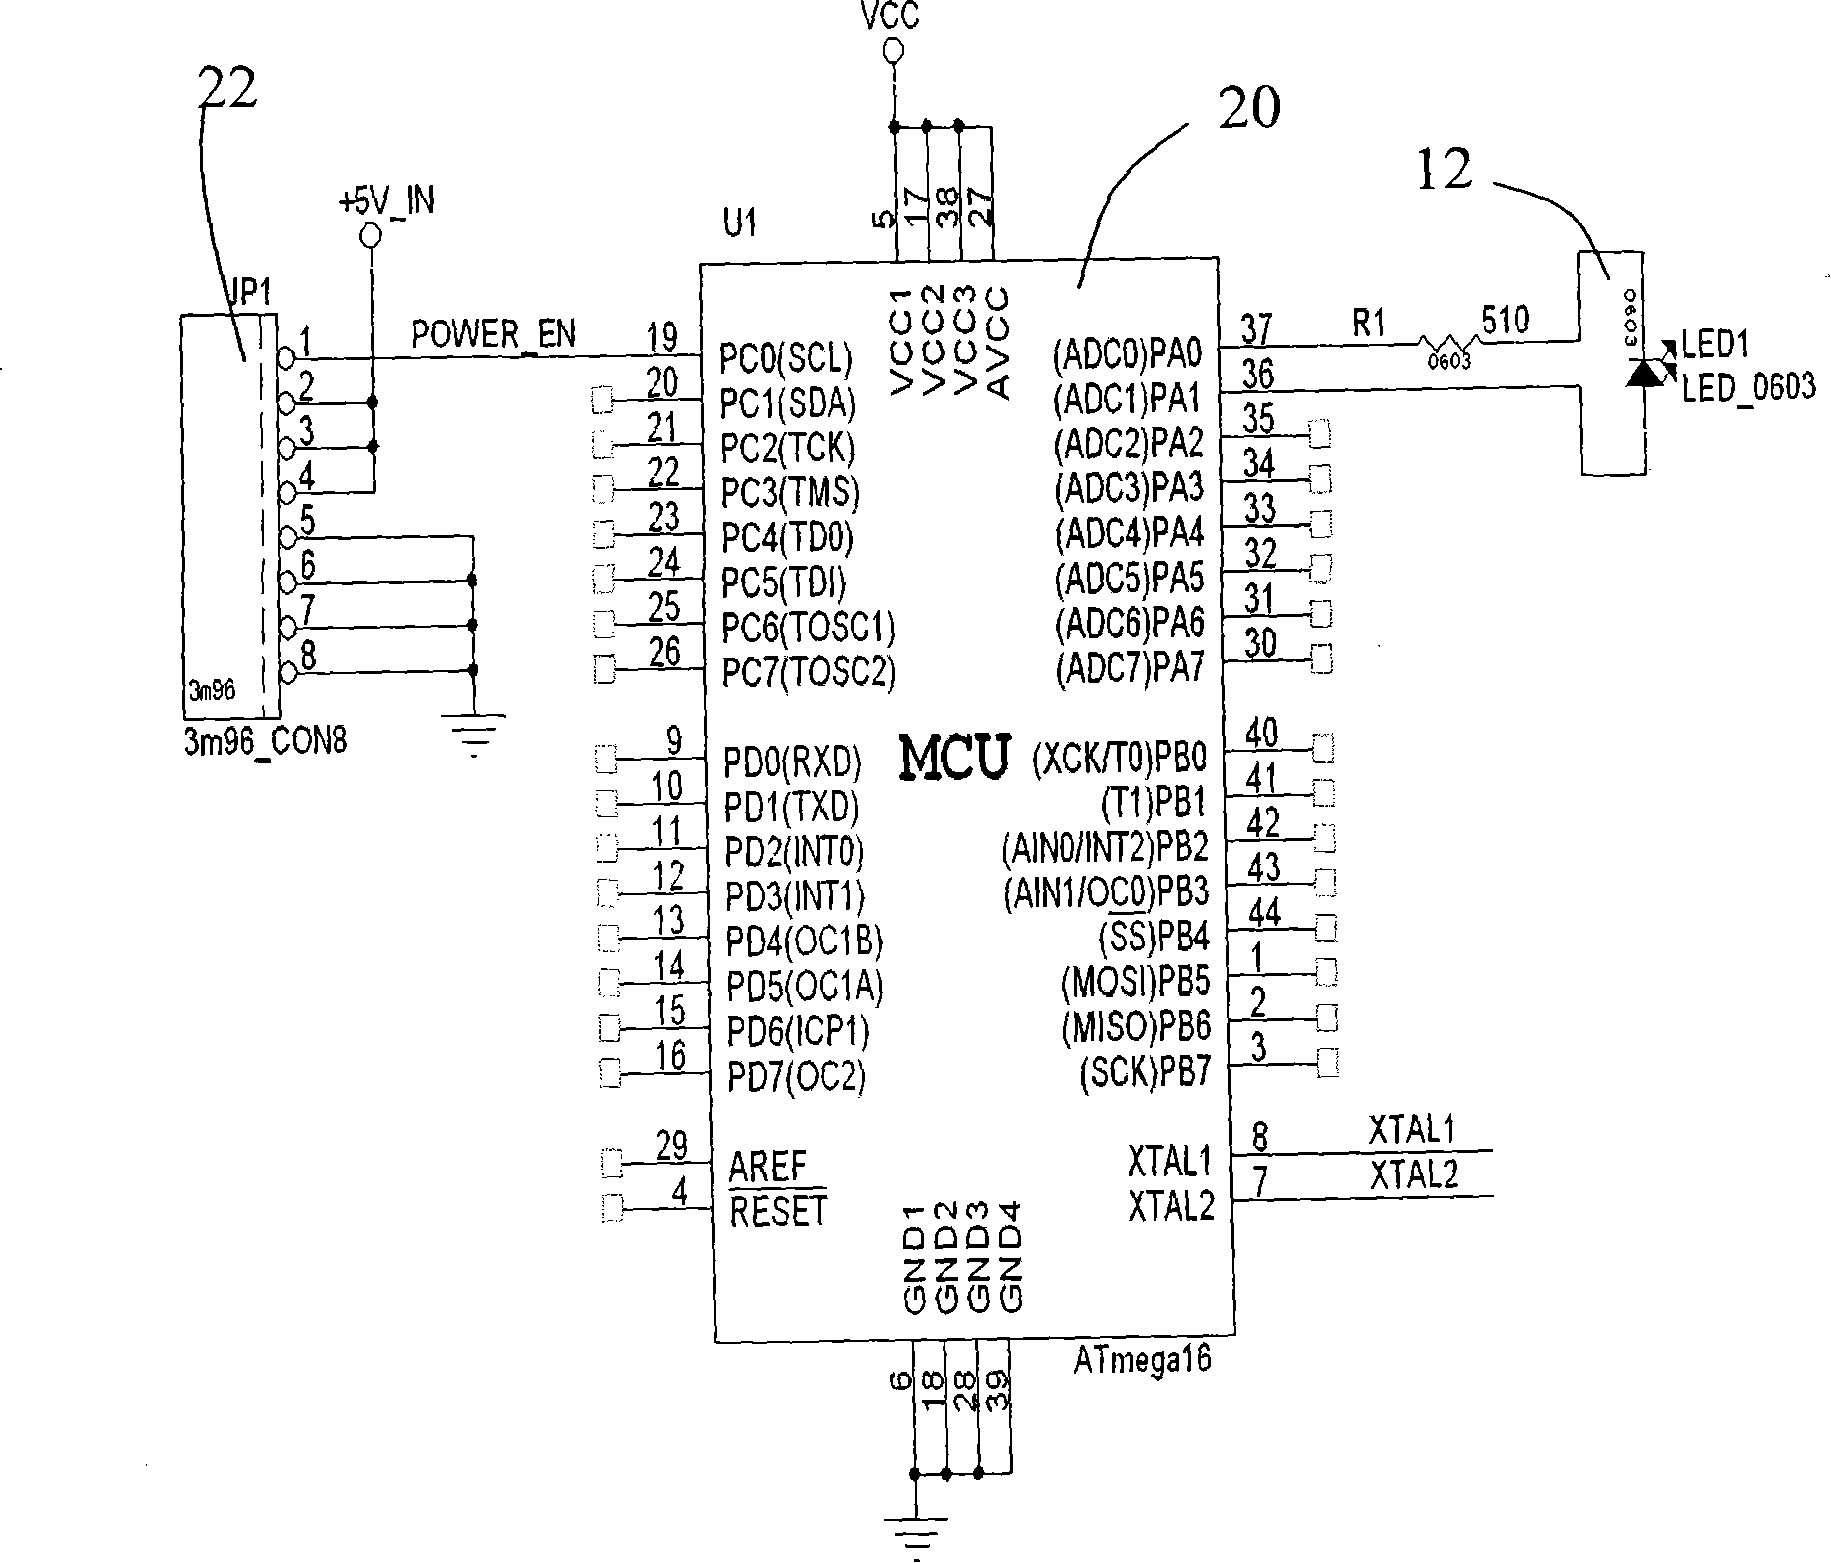 Light-emitting diode (LED) sensing and controlling system